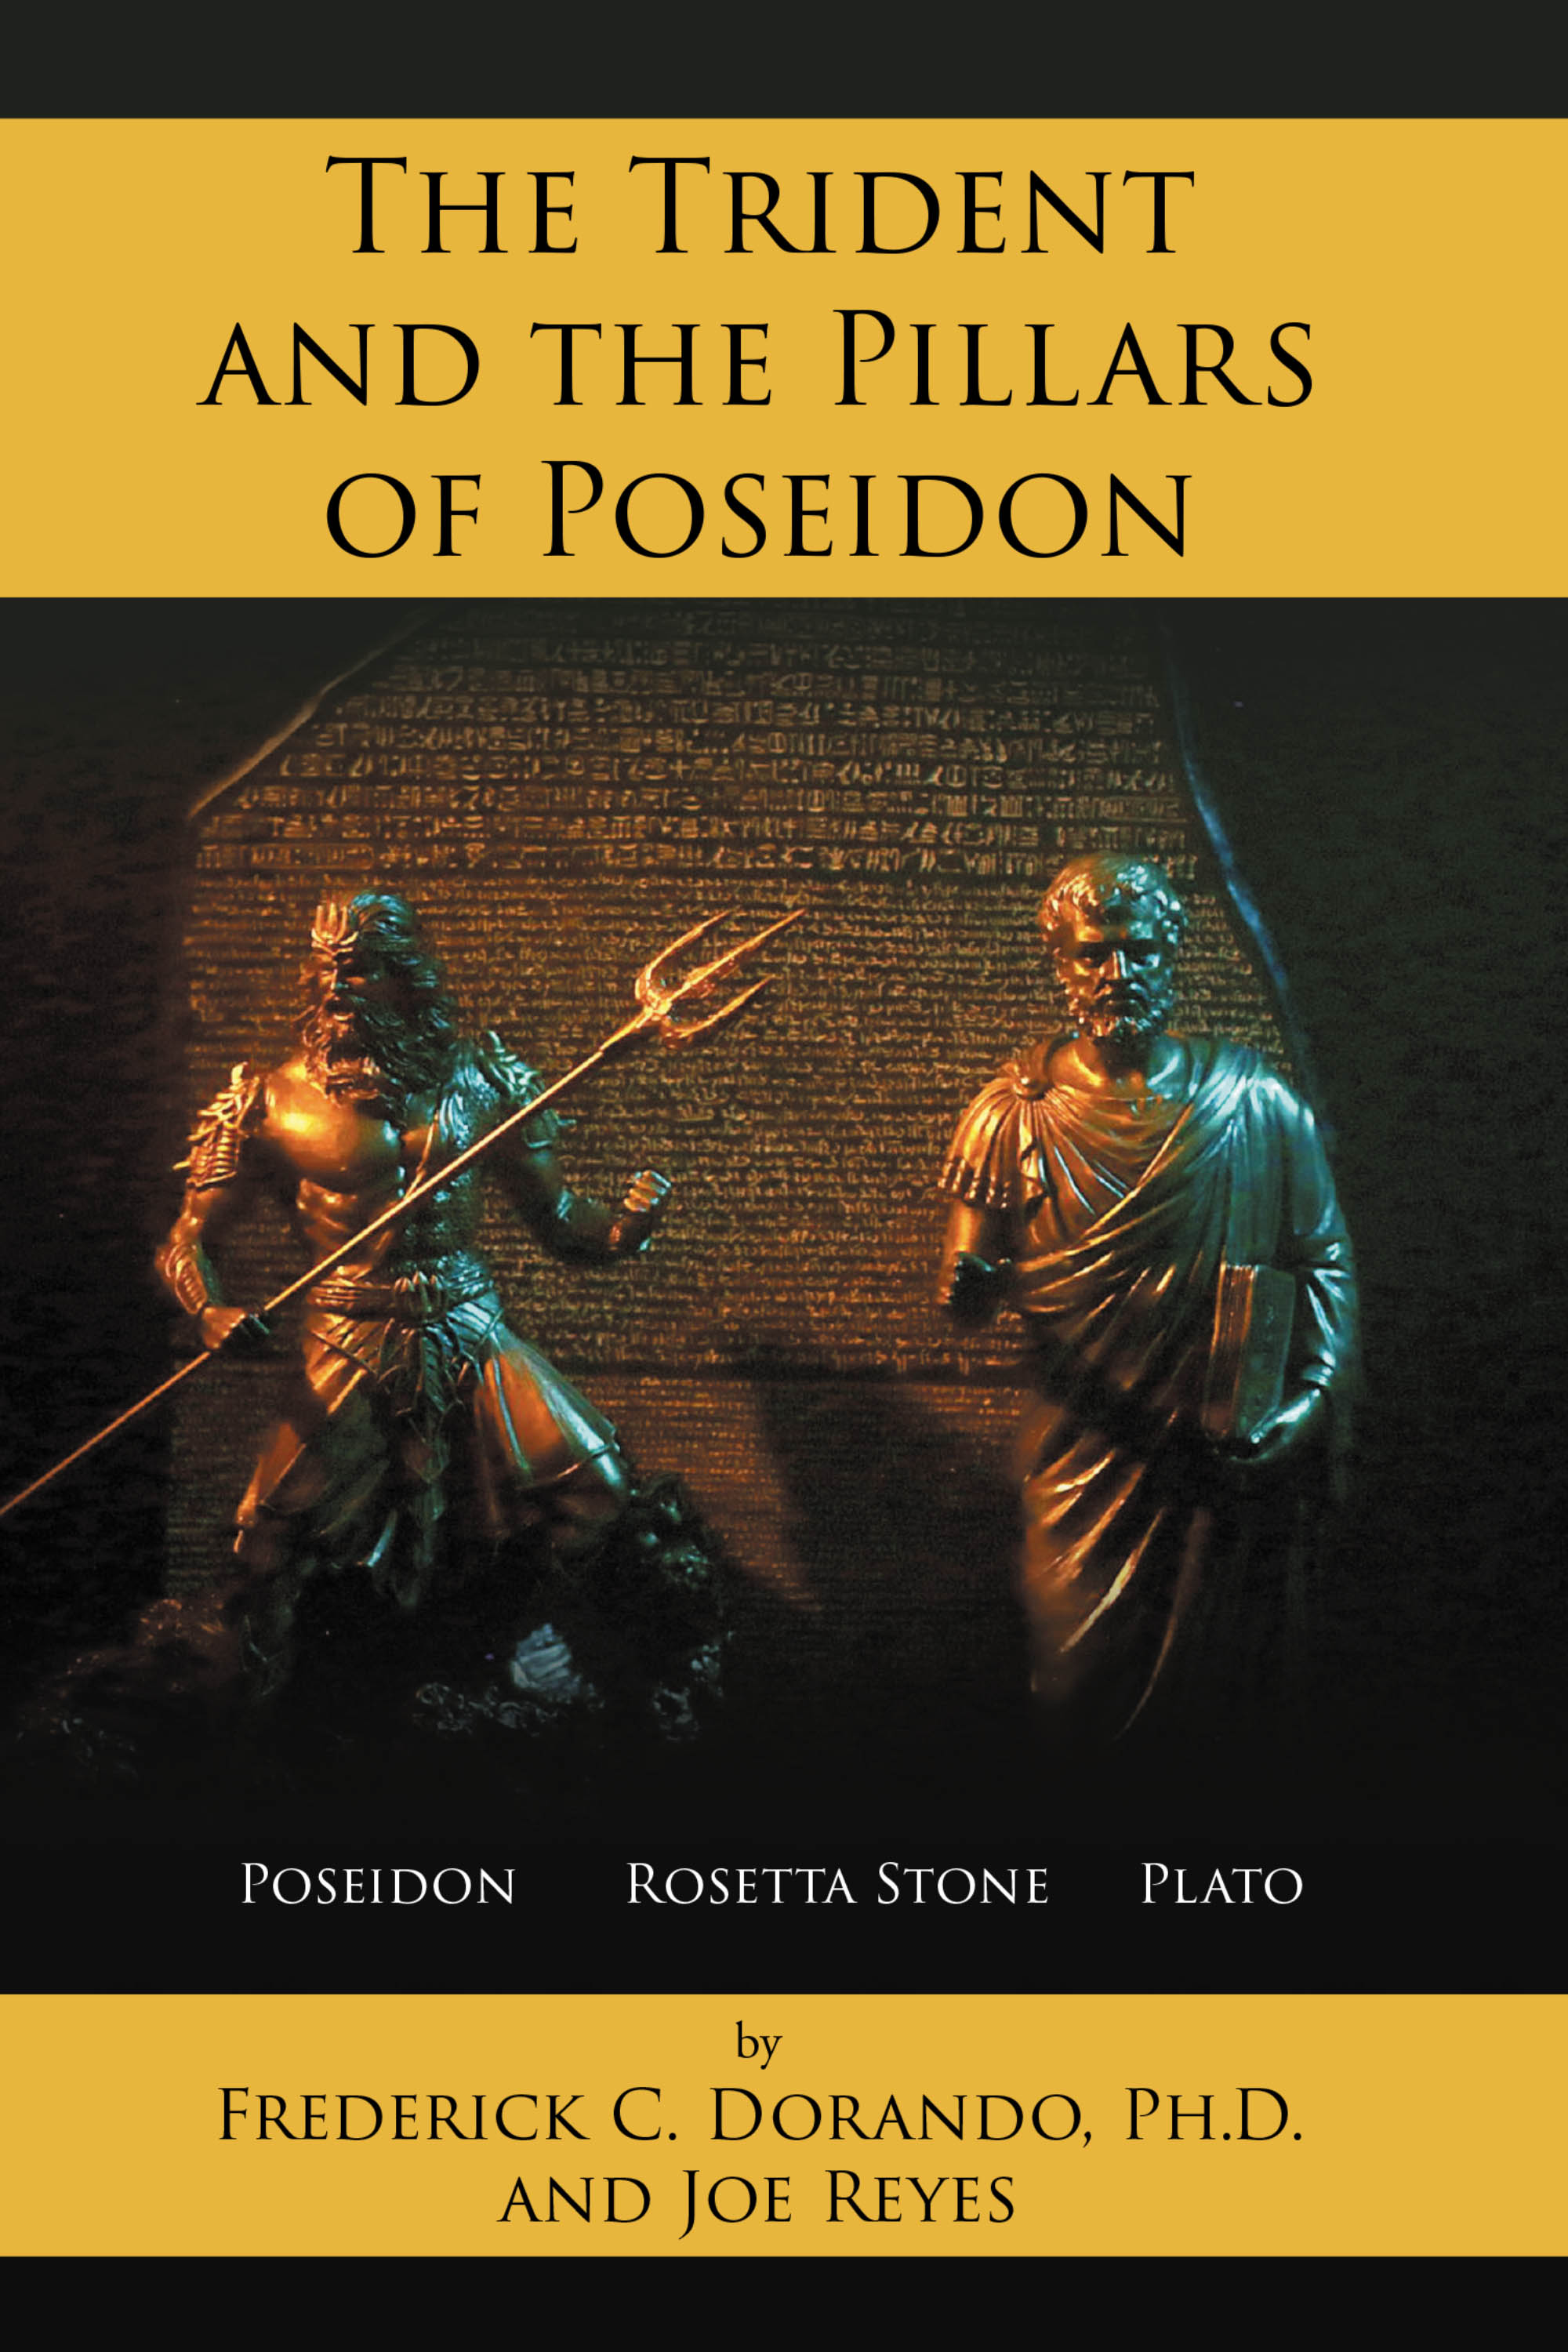 Authors Frederick C. Dorando, Ph.D. and Joe Reyes’s New Book, “The Trident and the Pillars of Poseidon,” Follows a Group of Archeologists Looking for the City of Atlantis